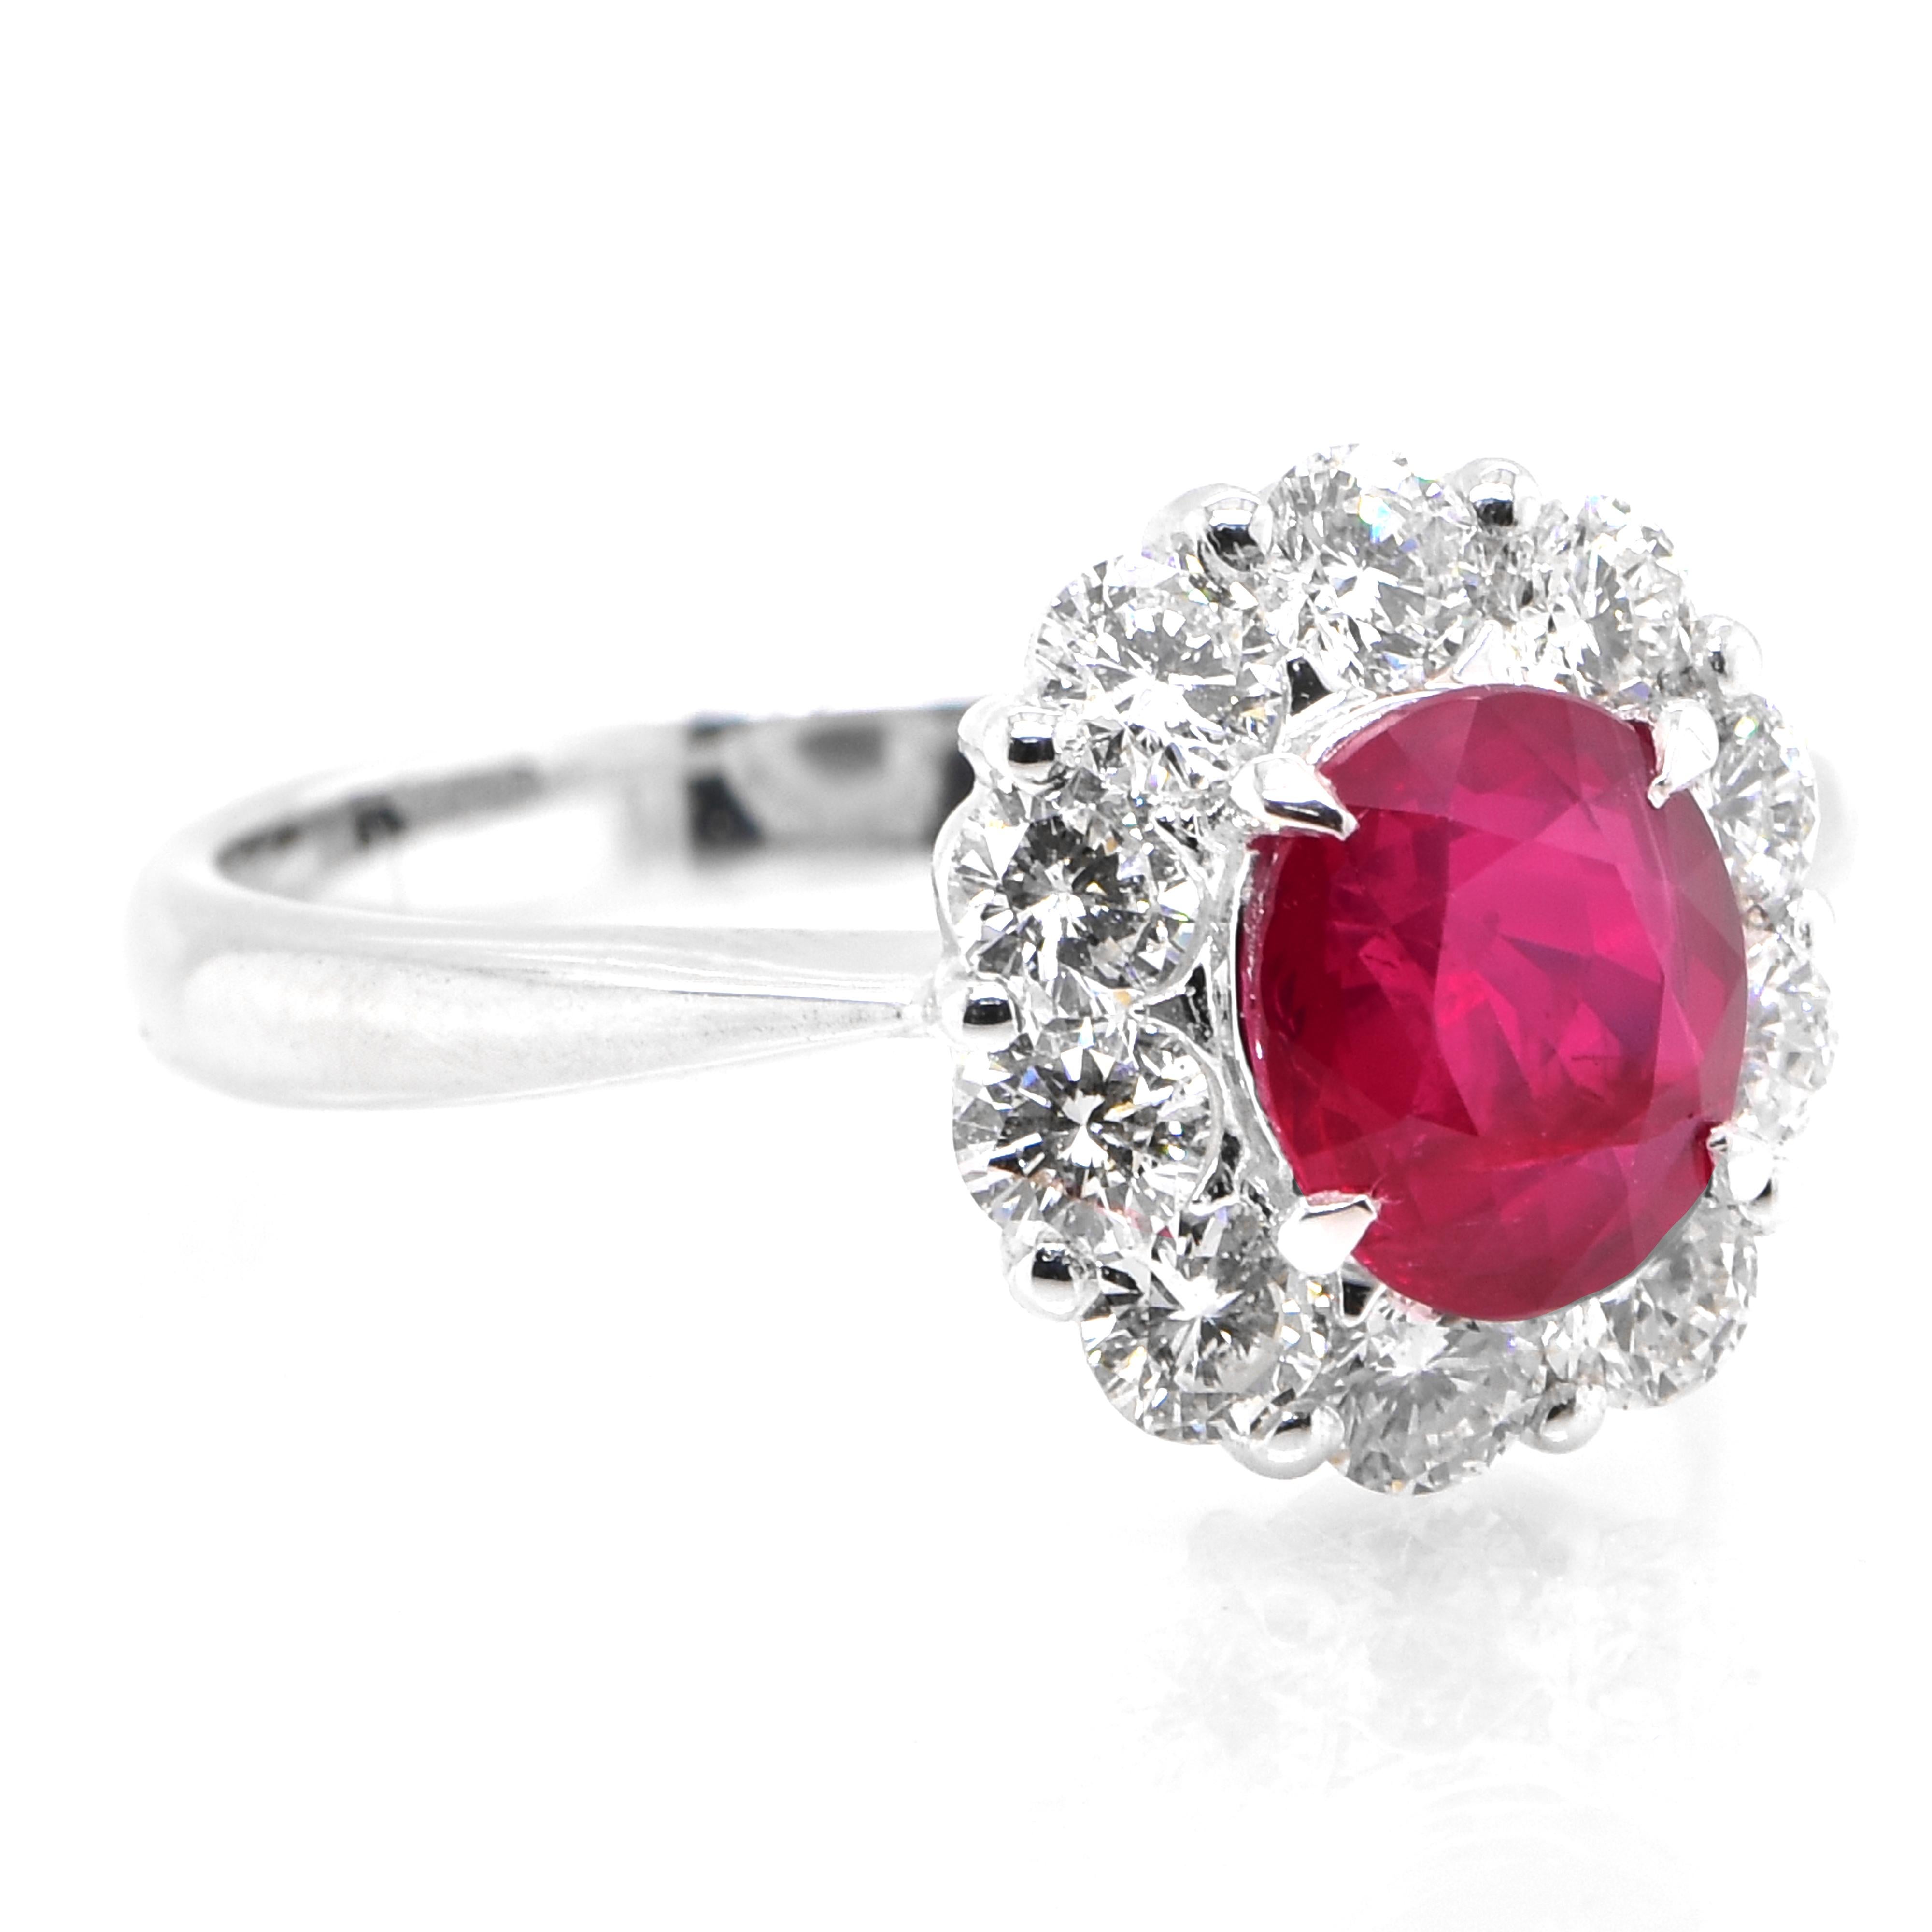 Modern AIGS Certified 1.39 Carat Untreated Ruby and Diamond Ring Made in Platinum For Sale